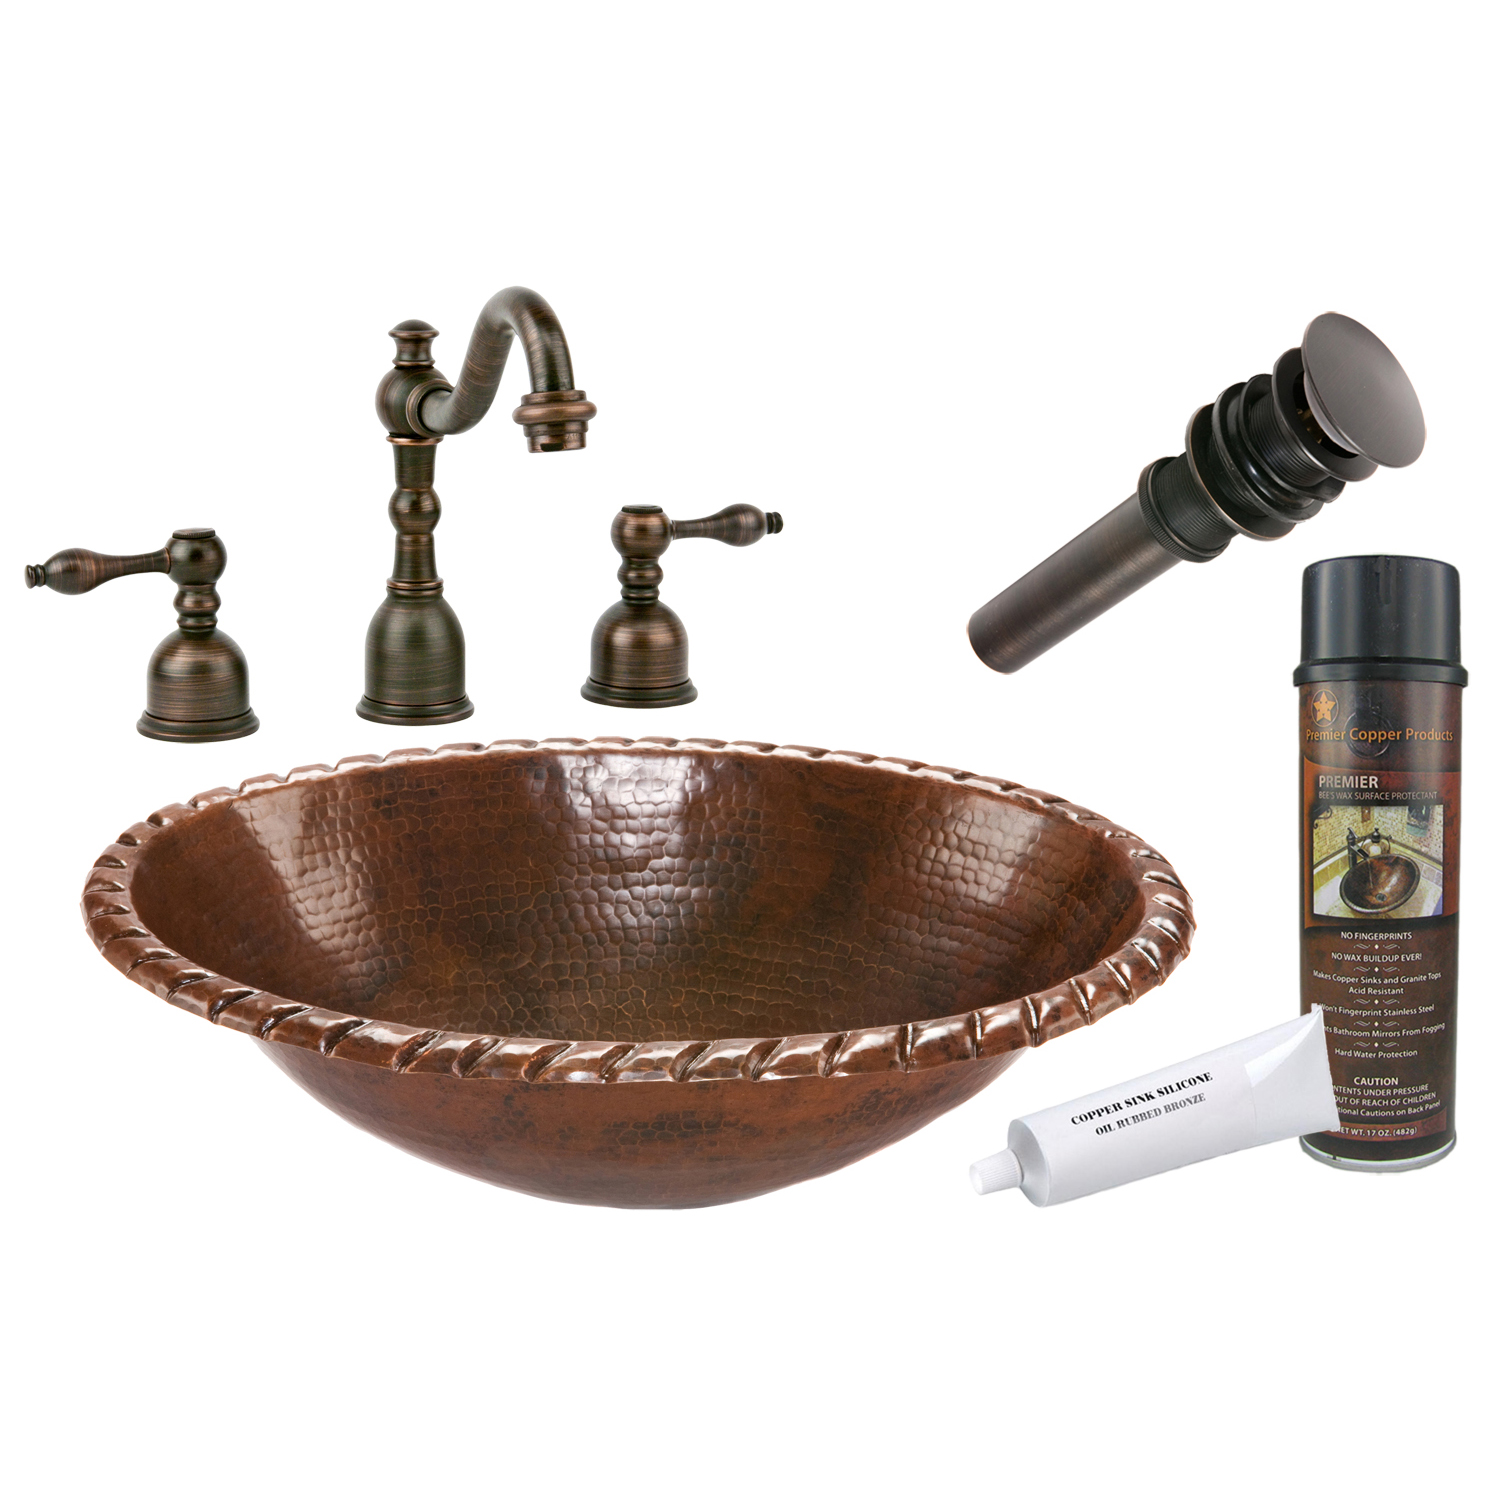 Oval Roped Rim Self Rimming Hammered Copper Sink, Faucet And Accessories Package, Oil Rubbed Bronze